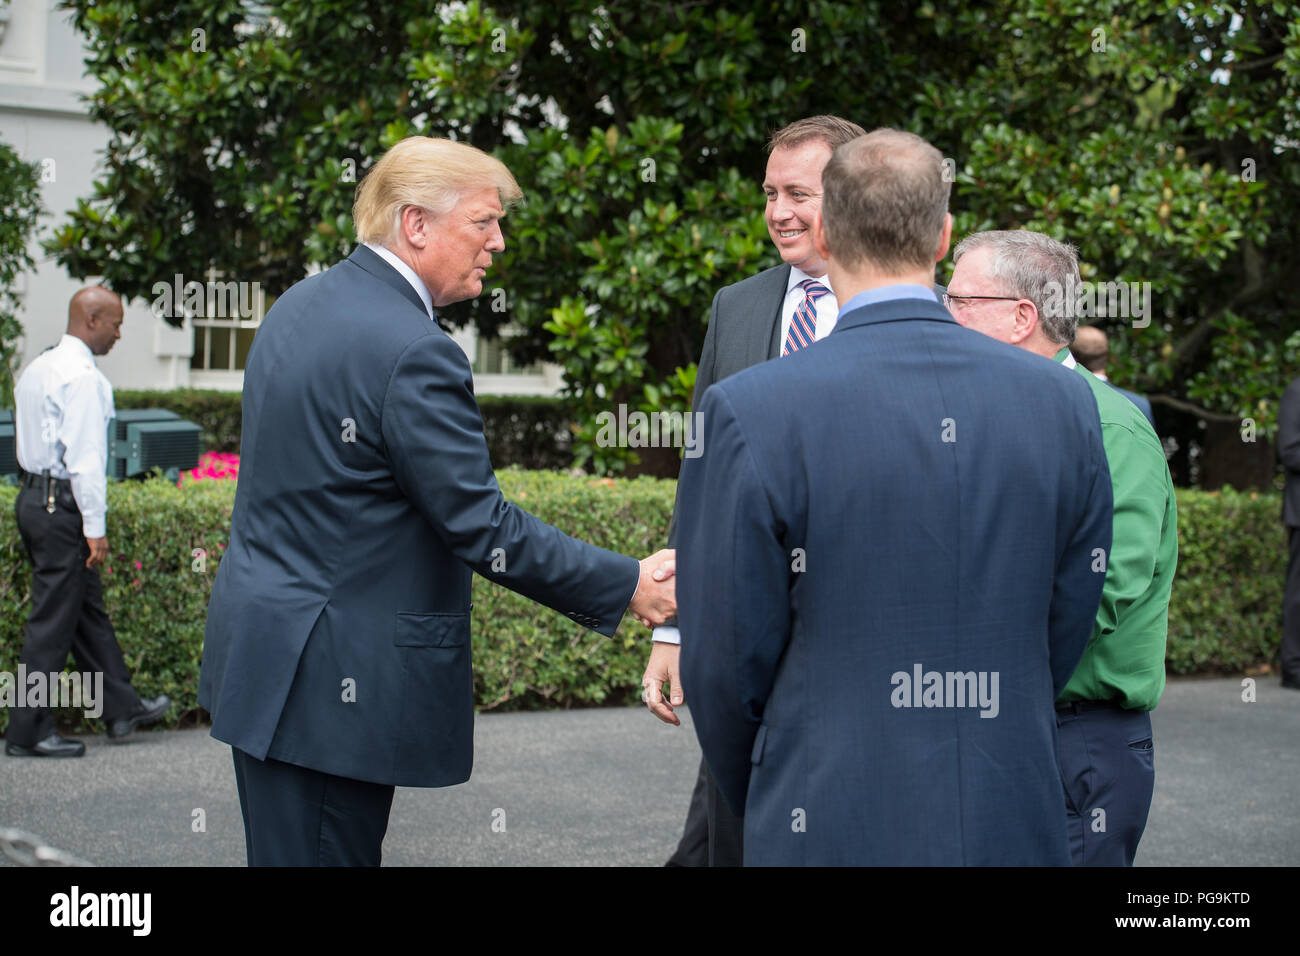 President Donald Trump meets NASA Administrator Jim Bridenstine, front, NASA Chief Financial Officer Jeff DeWitt, second from left, and Orion Program Manager, W. Michael Hawes, right, during a Made in America Product Showcase at the White House, Monday, July 23, 2018 in Washington. The Orion crew module that launched on Dec. 5, 2014 on the Exploration Flight Test-1 was also on display during the event. Lockheed Martin, NASA’s prime contractor for Orion, began manufacturing the Orion crew module in 2011 and delivered it in July 2012 to NASA's Kennedy Space Center where final assembly, integrati Stock Photo